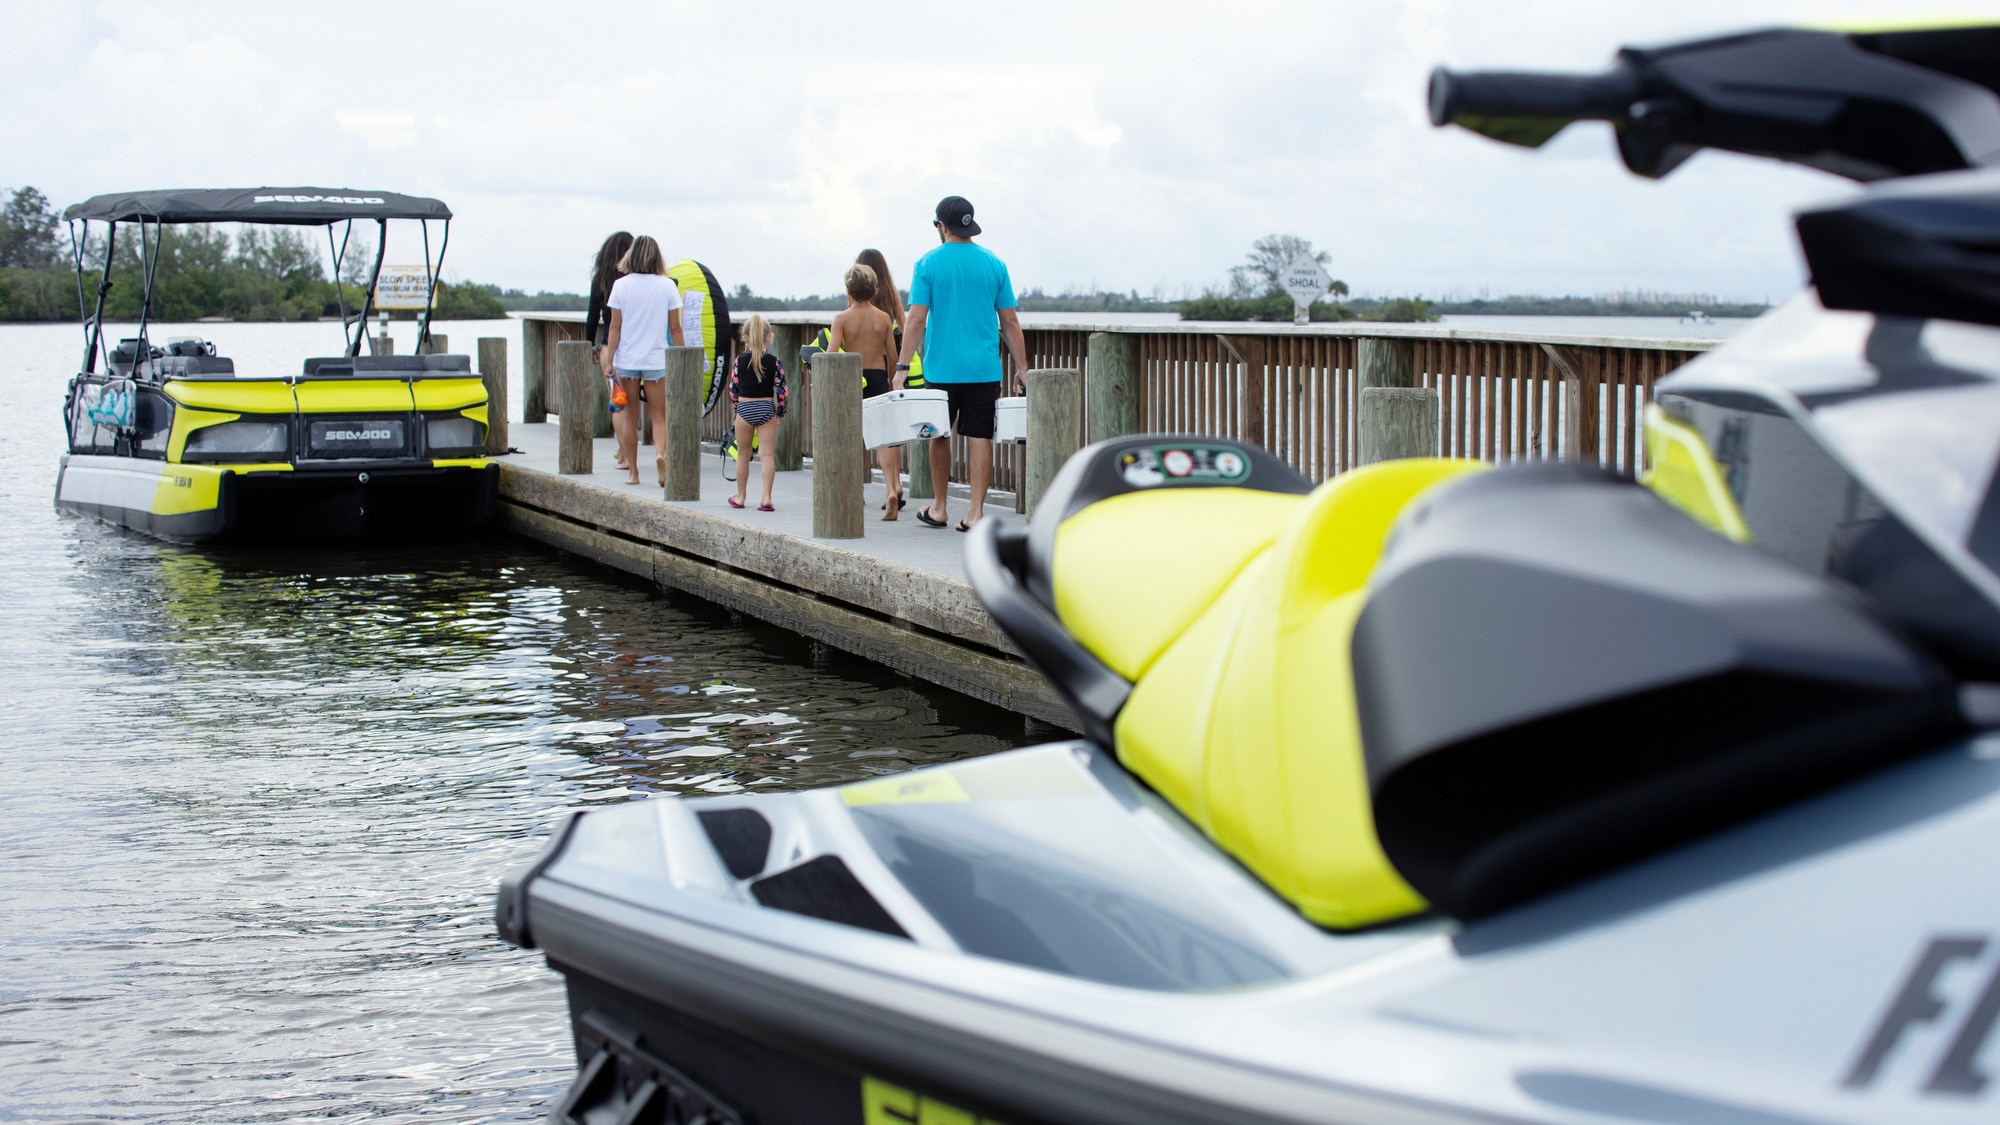 Family at the dock getting ready for a day on the water with their Sea-Doo